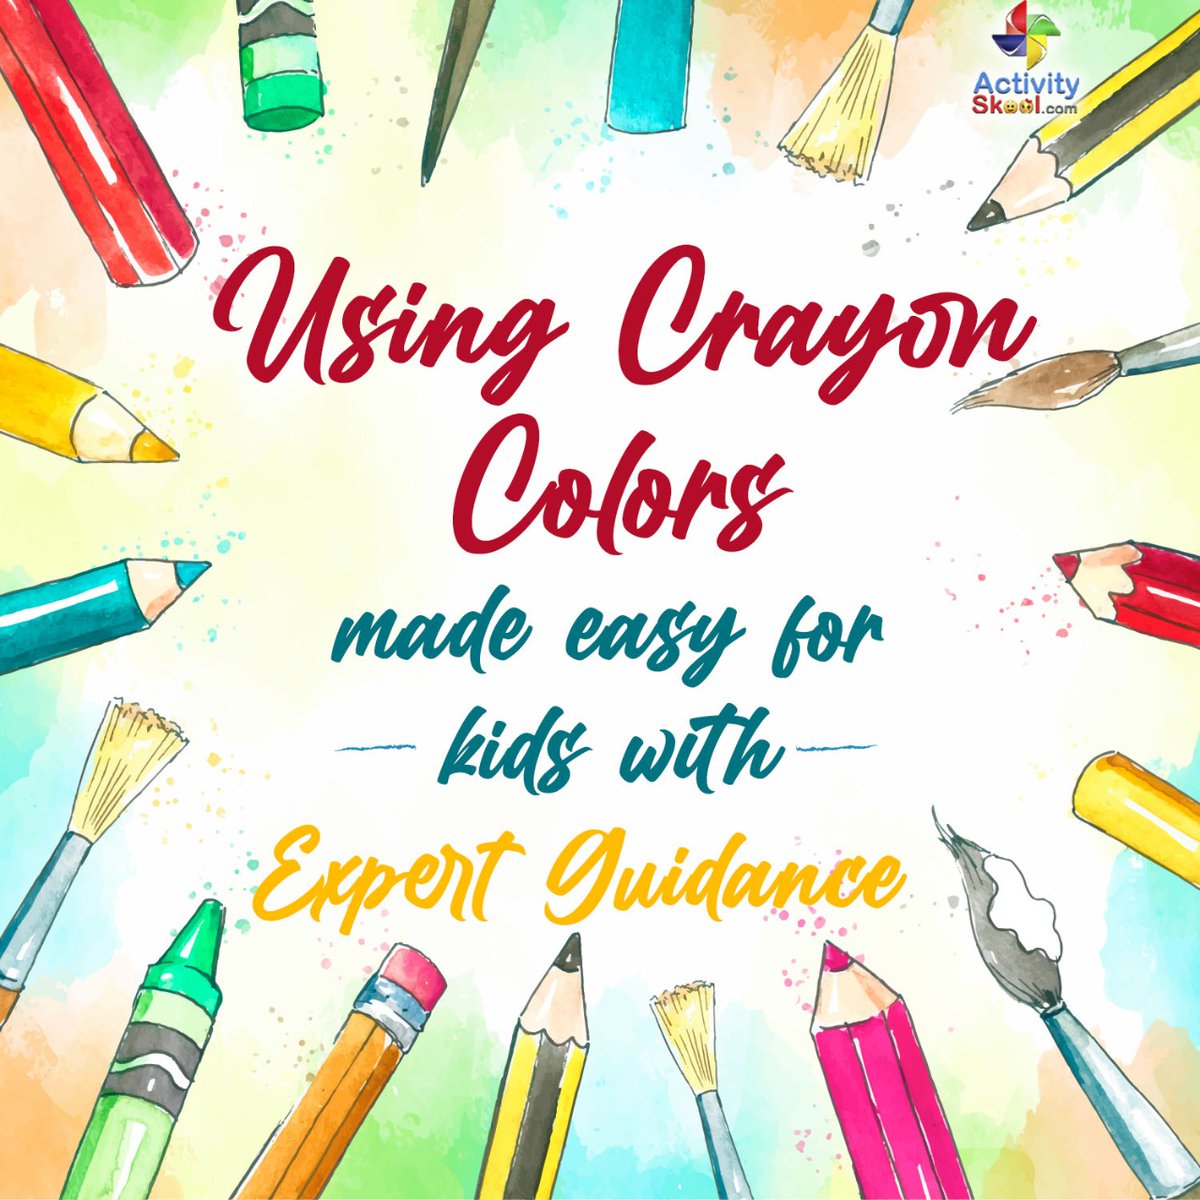 Crayon colors made esy to use for #kids with personal guidance from #art experts conducting #artclassesforkids on #ActivitySkool 
.
.
#onlineartclass #kidsartclass #onlineartclassesforkids #artclassesforkids